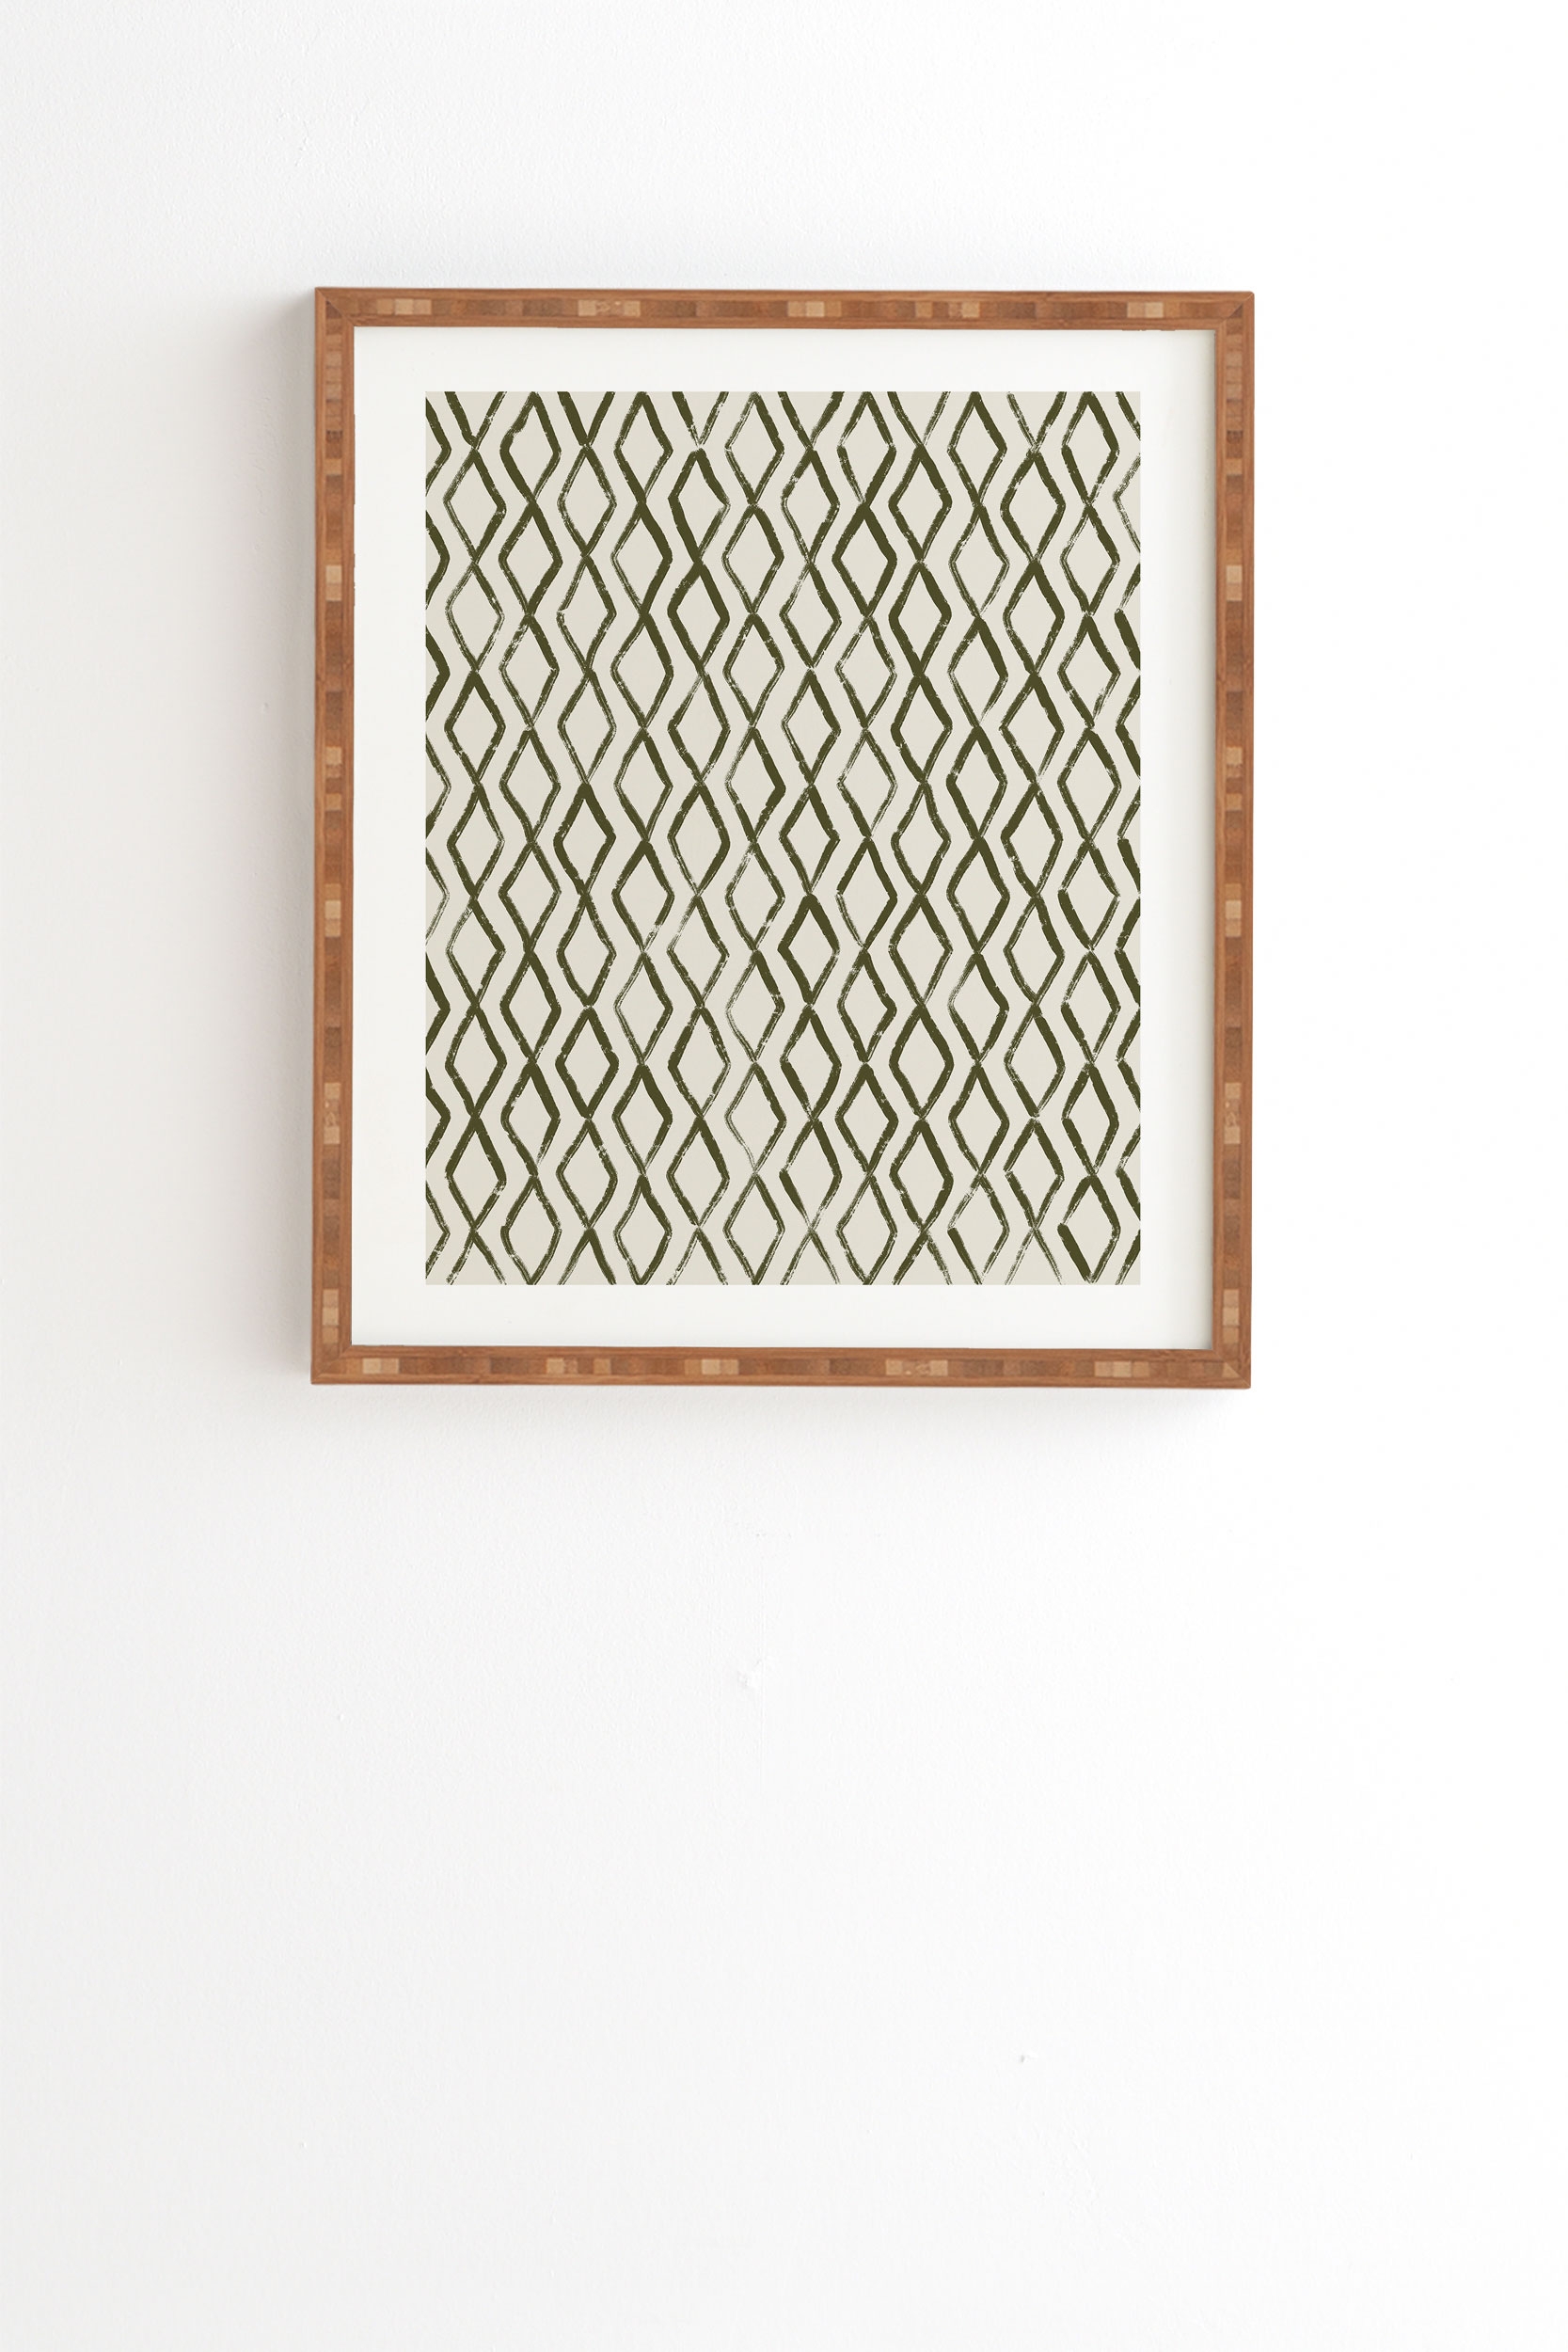 Simple Hand Drawn Pattern Vi by Alisa Galitsyna - Framed Wall Art Bamboo 12" x 12" - Image 1